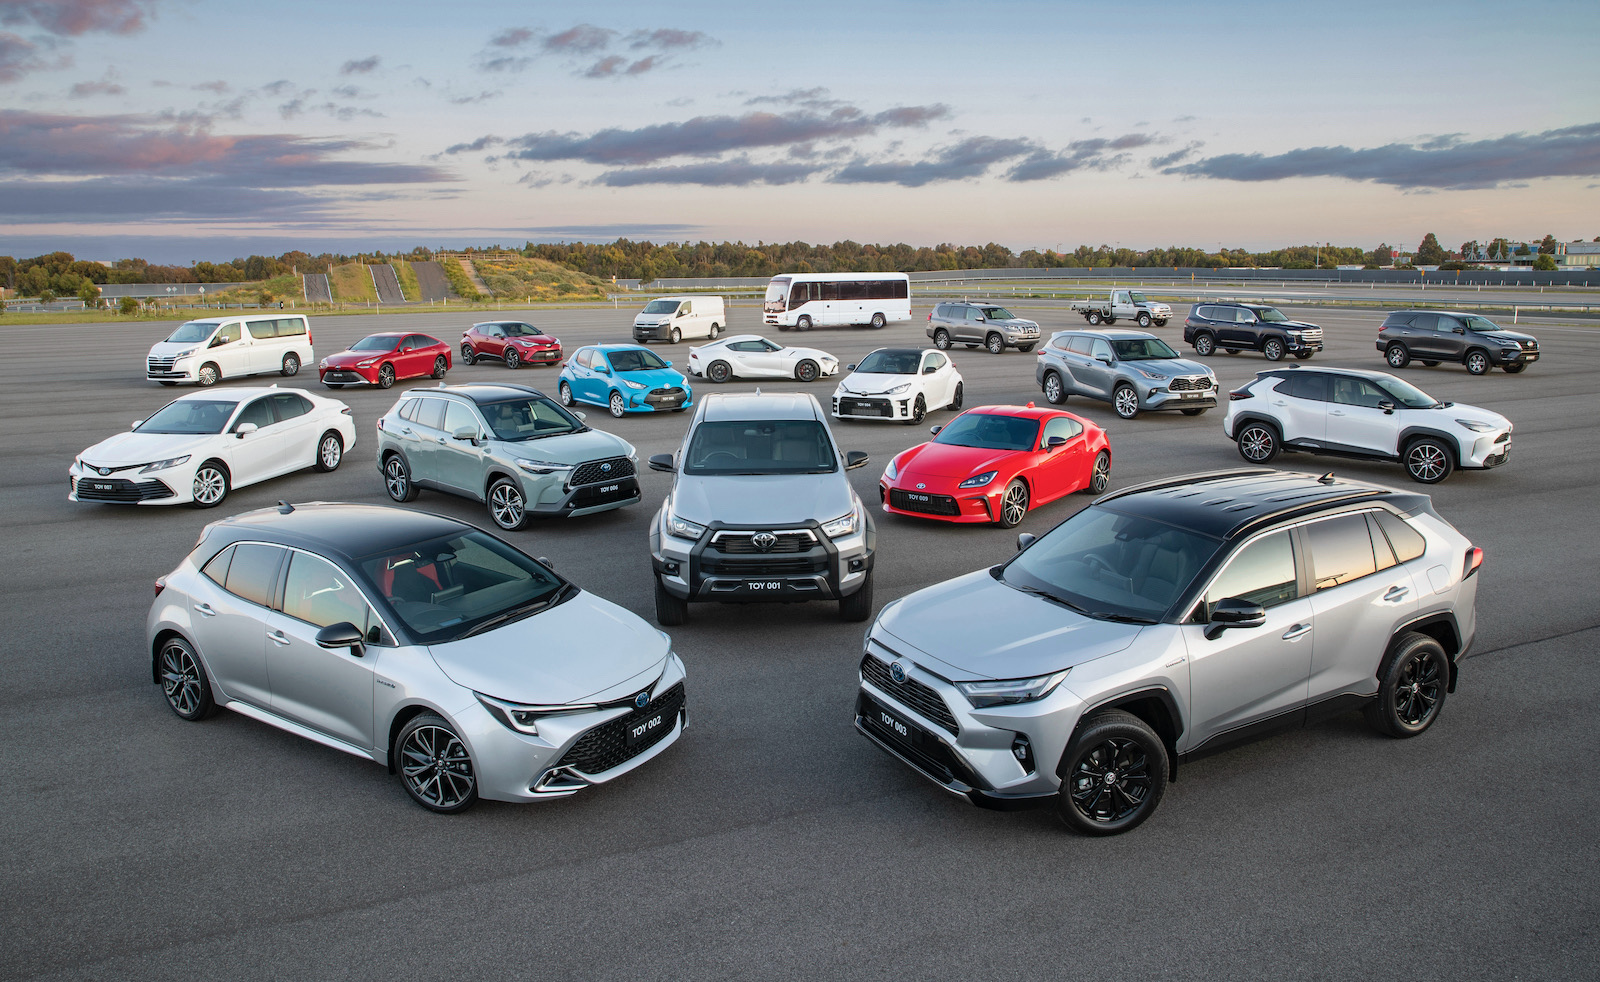 VFACTS Top 10 bestselling cars in Australia during 2022 PerformanceDrive